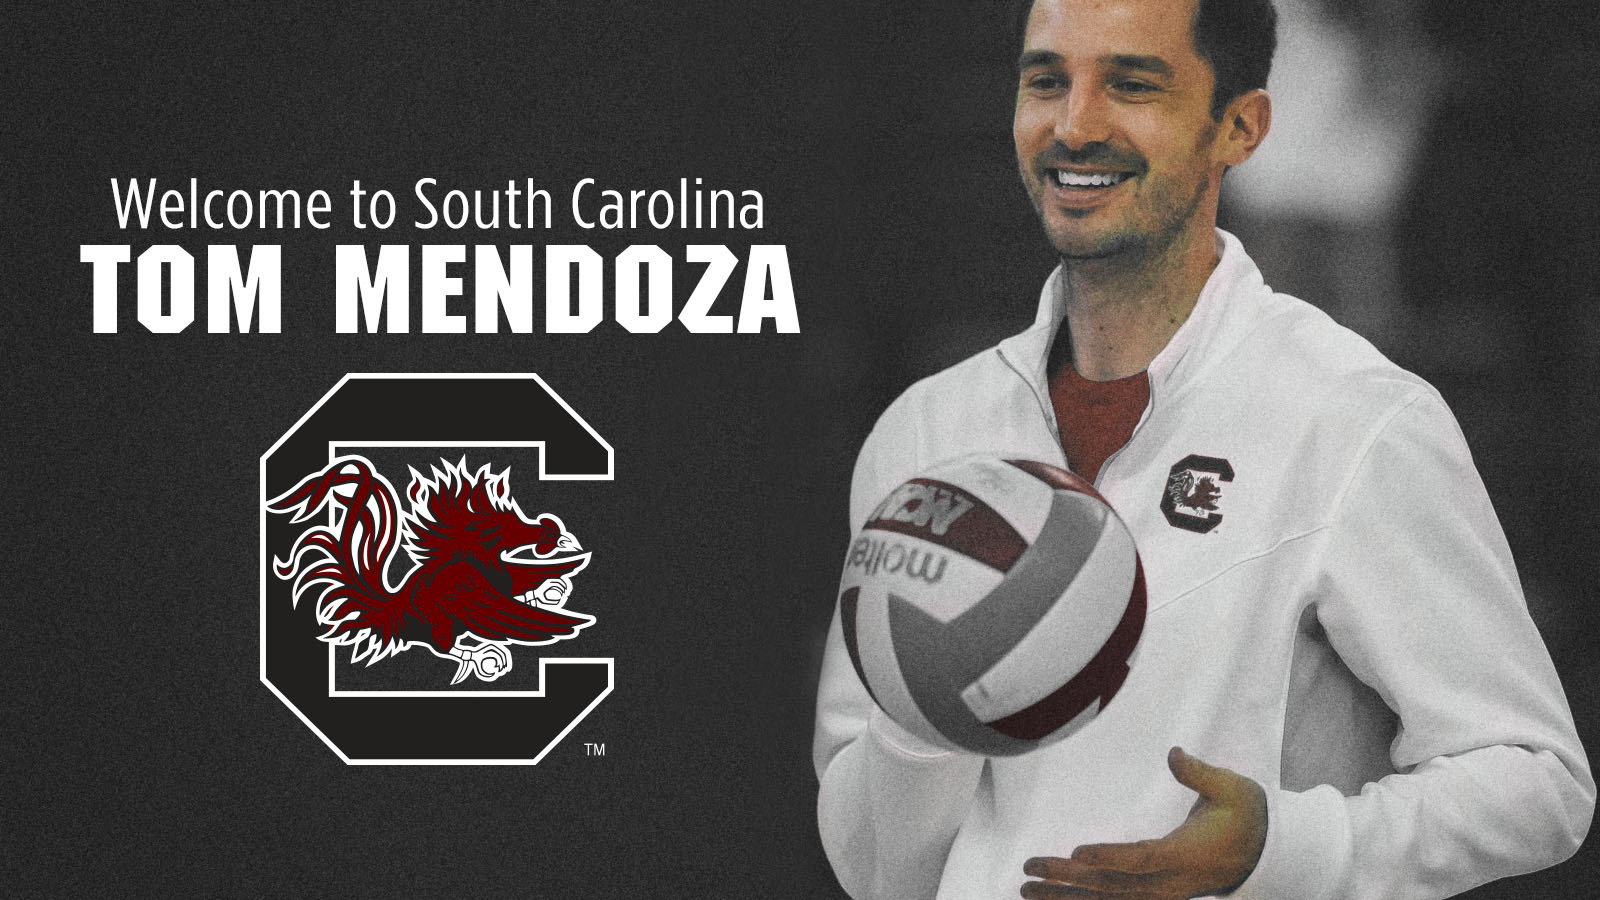 Tom Mendoza Named as New Head Volleyball Coach